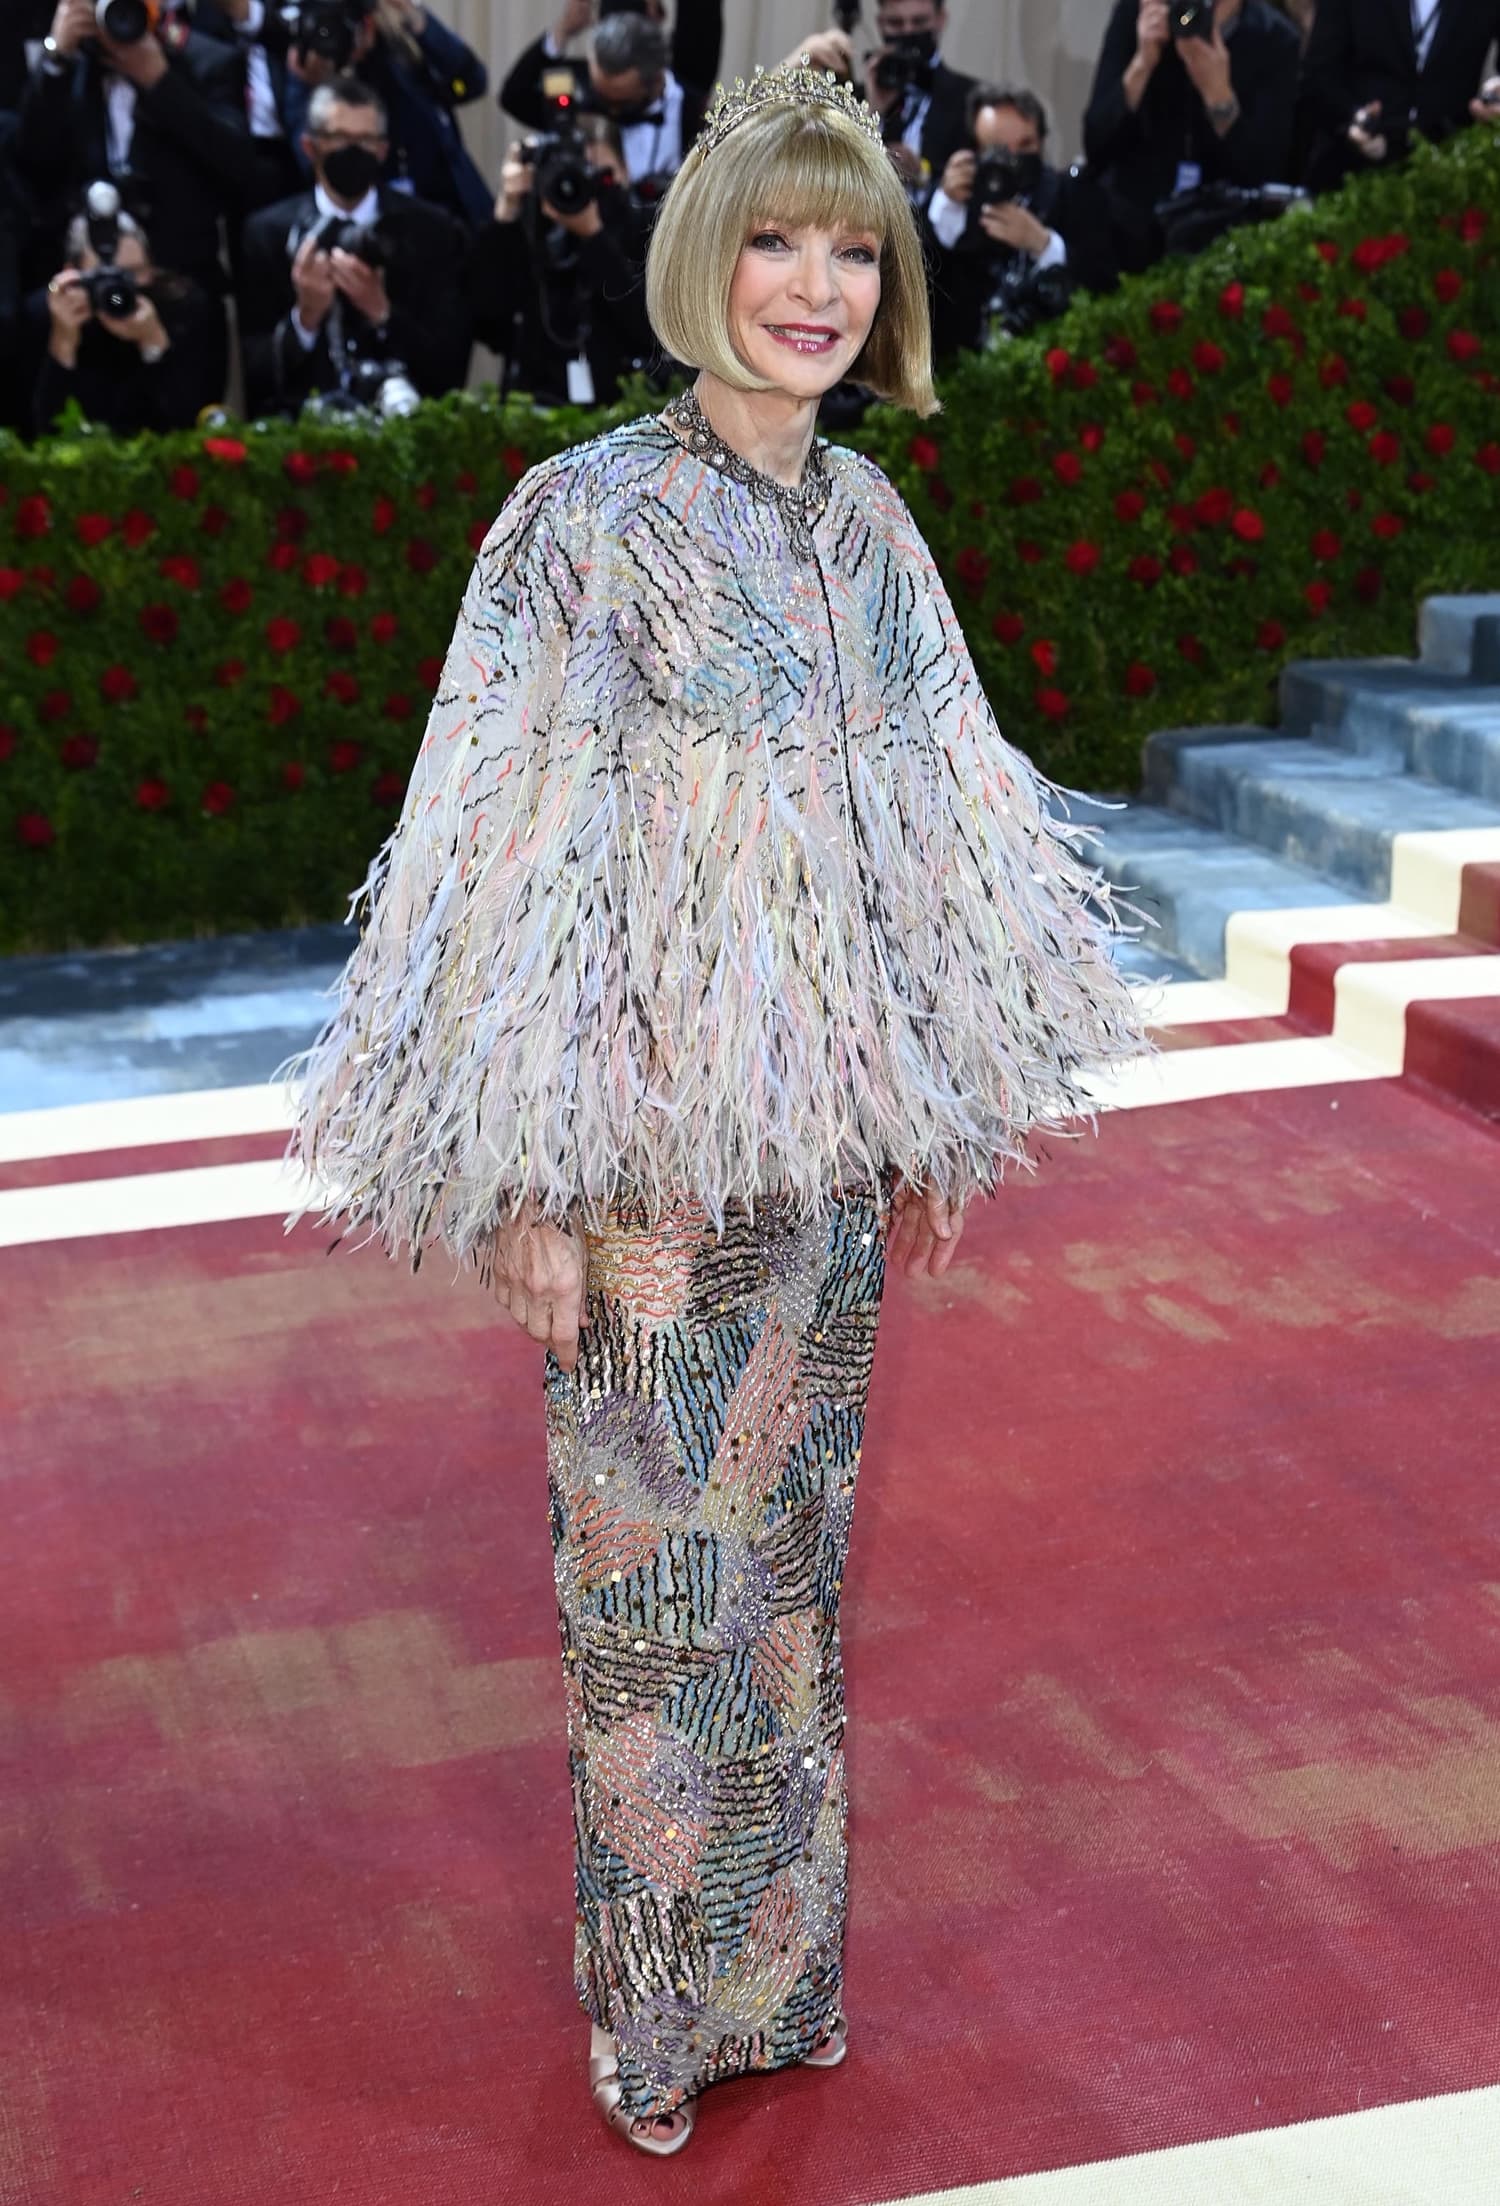 Anna Wintour wears a tiara with a beaded pink feathered Chanel gown at the 2022 Met Gala Celebrating "In America: An Anthology of Fashion" at The Metropolitan Museum of Art